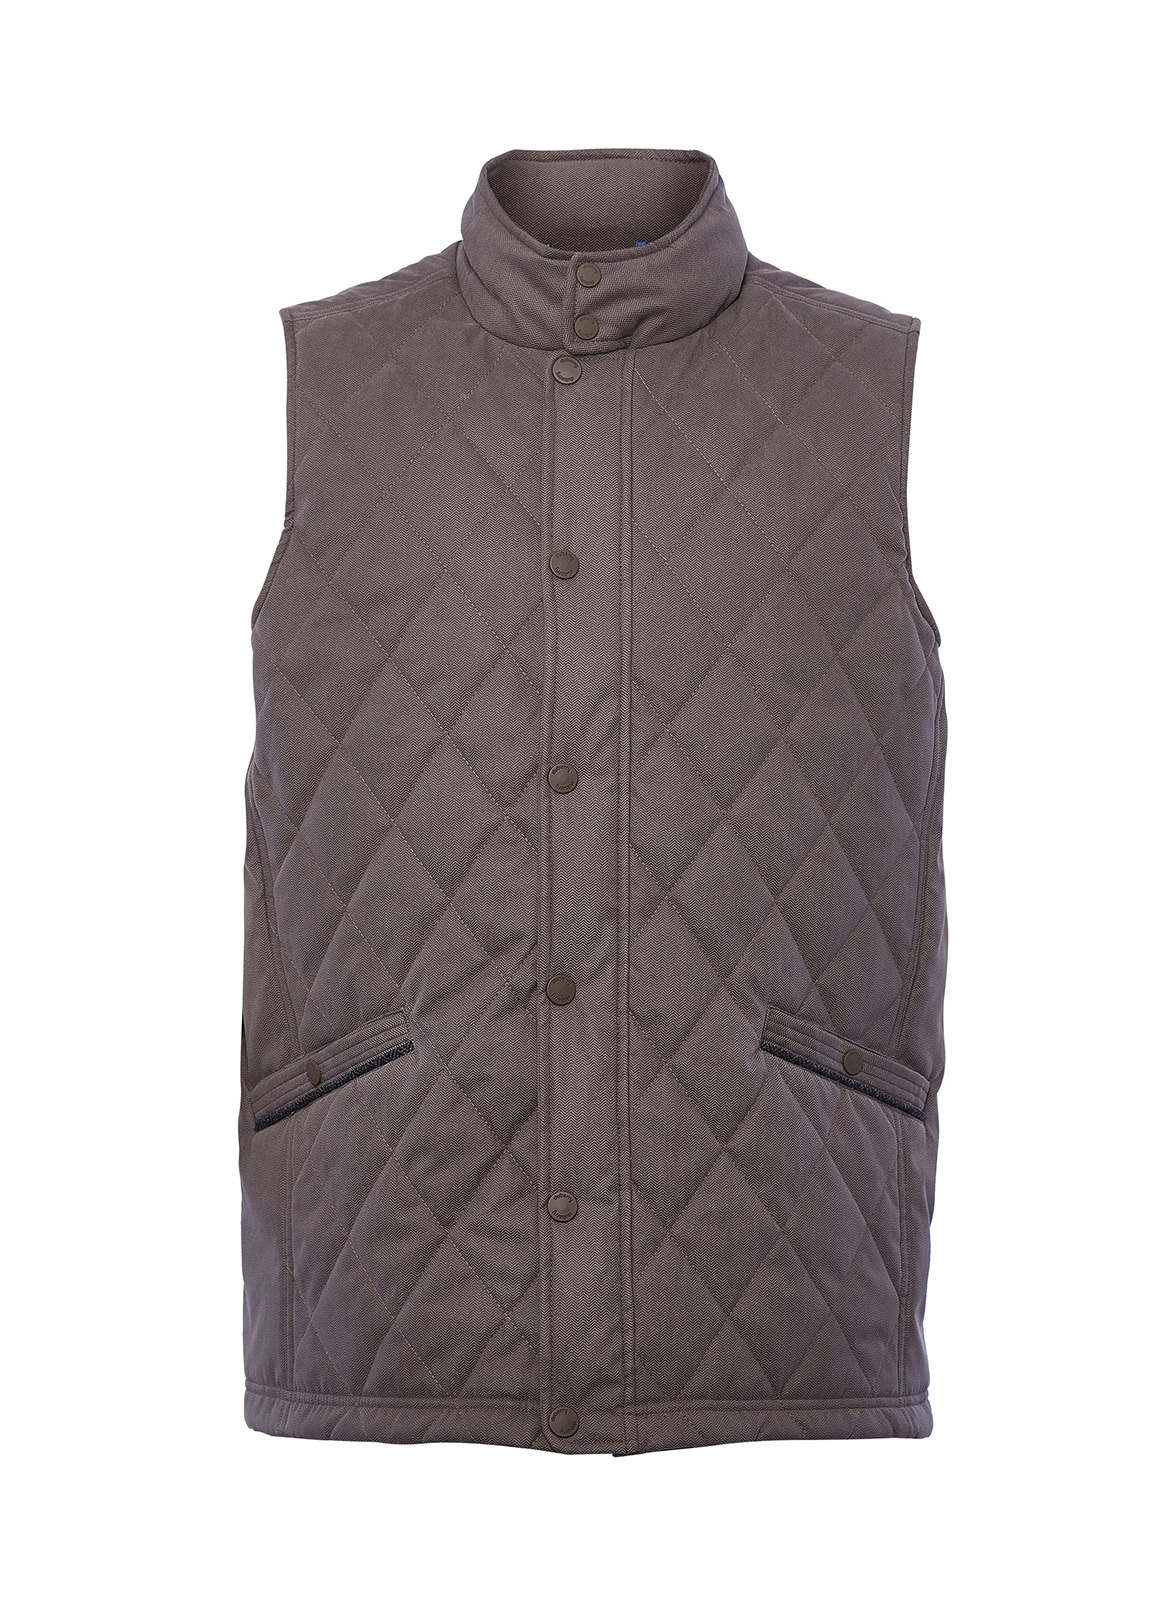 Dubarry_Clarke Quilted Gilet - Ginger_Image_2